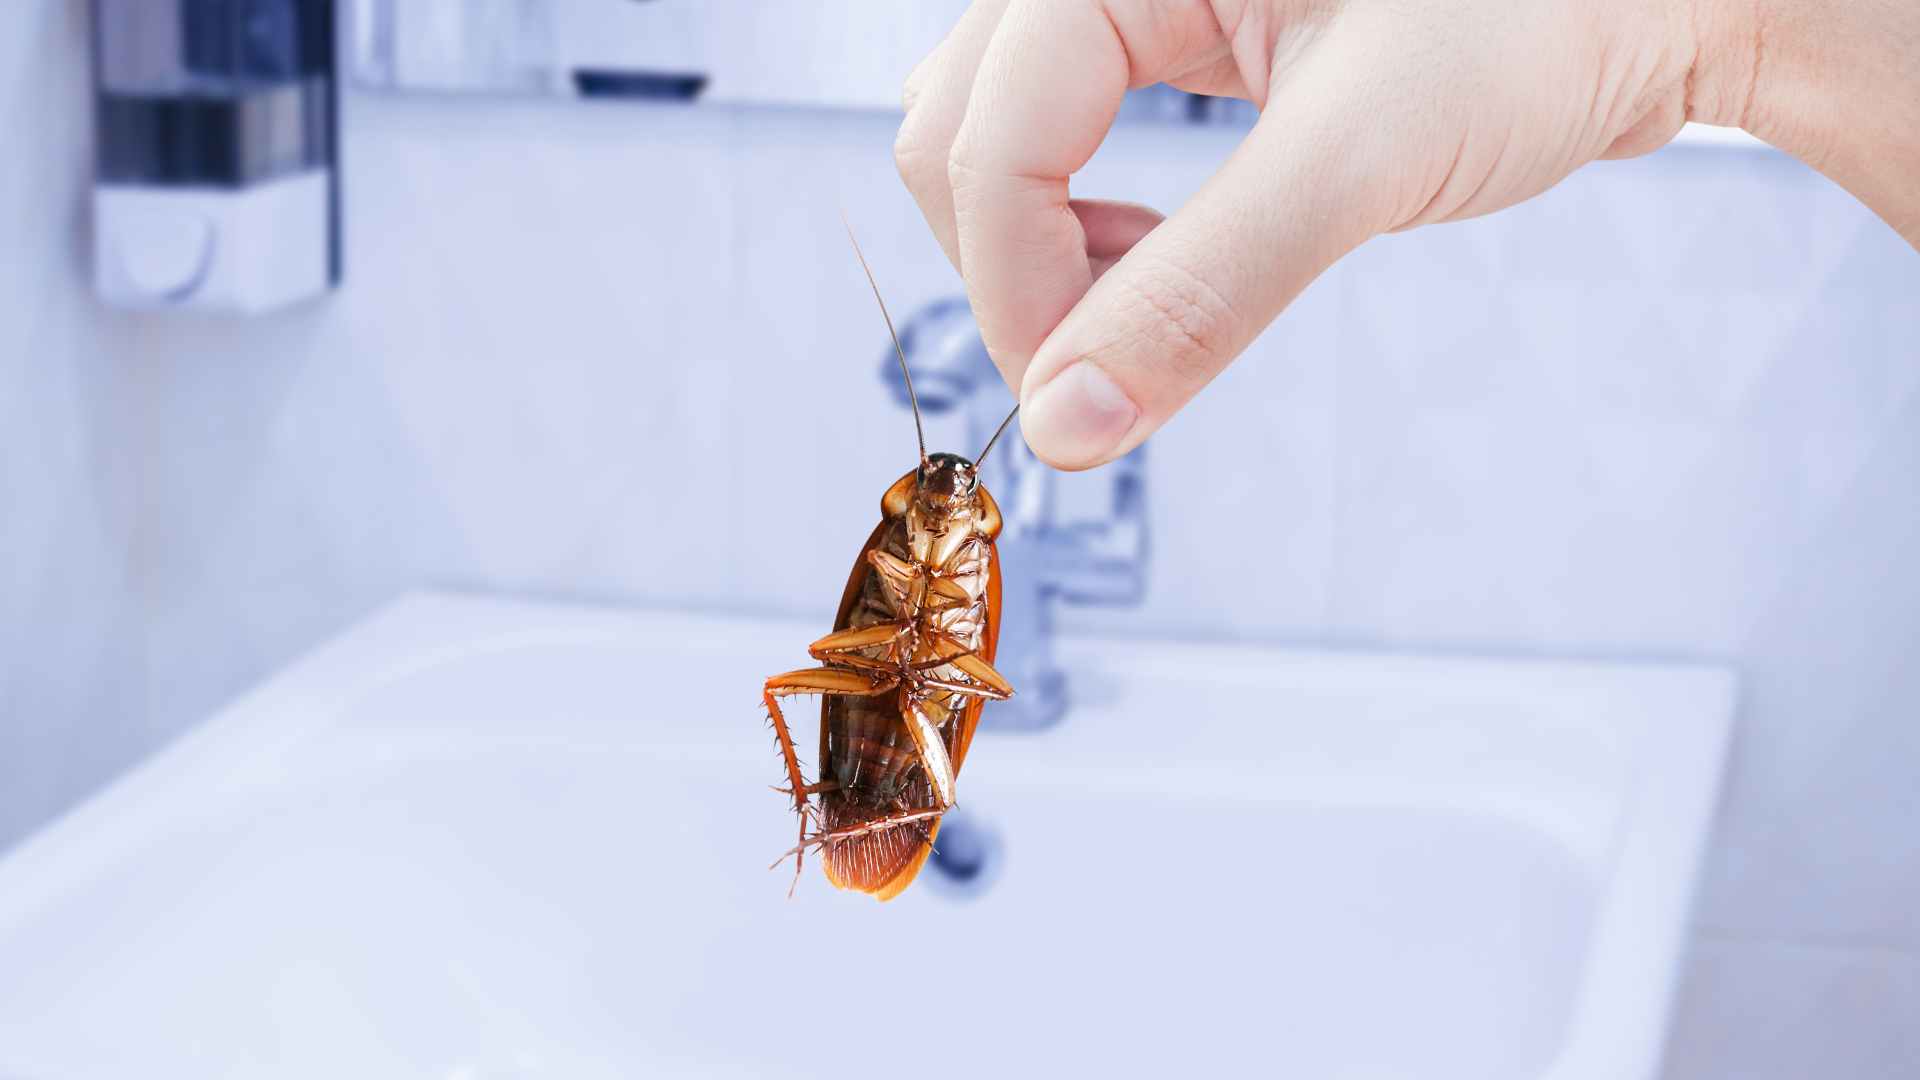 How to Get Rid of Roaches in Bathroom: Expert Tips